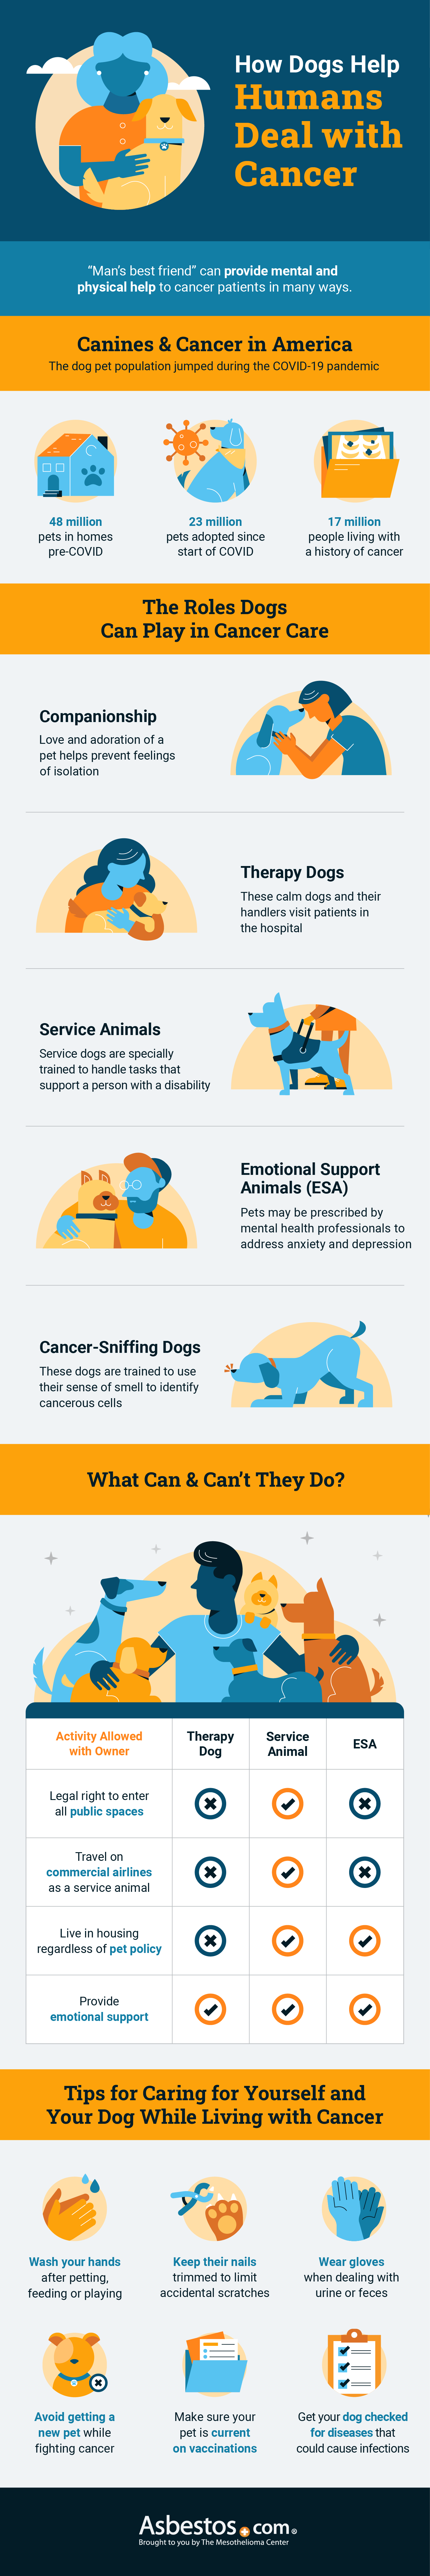 How Dogs Help Humans Deal With Cance